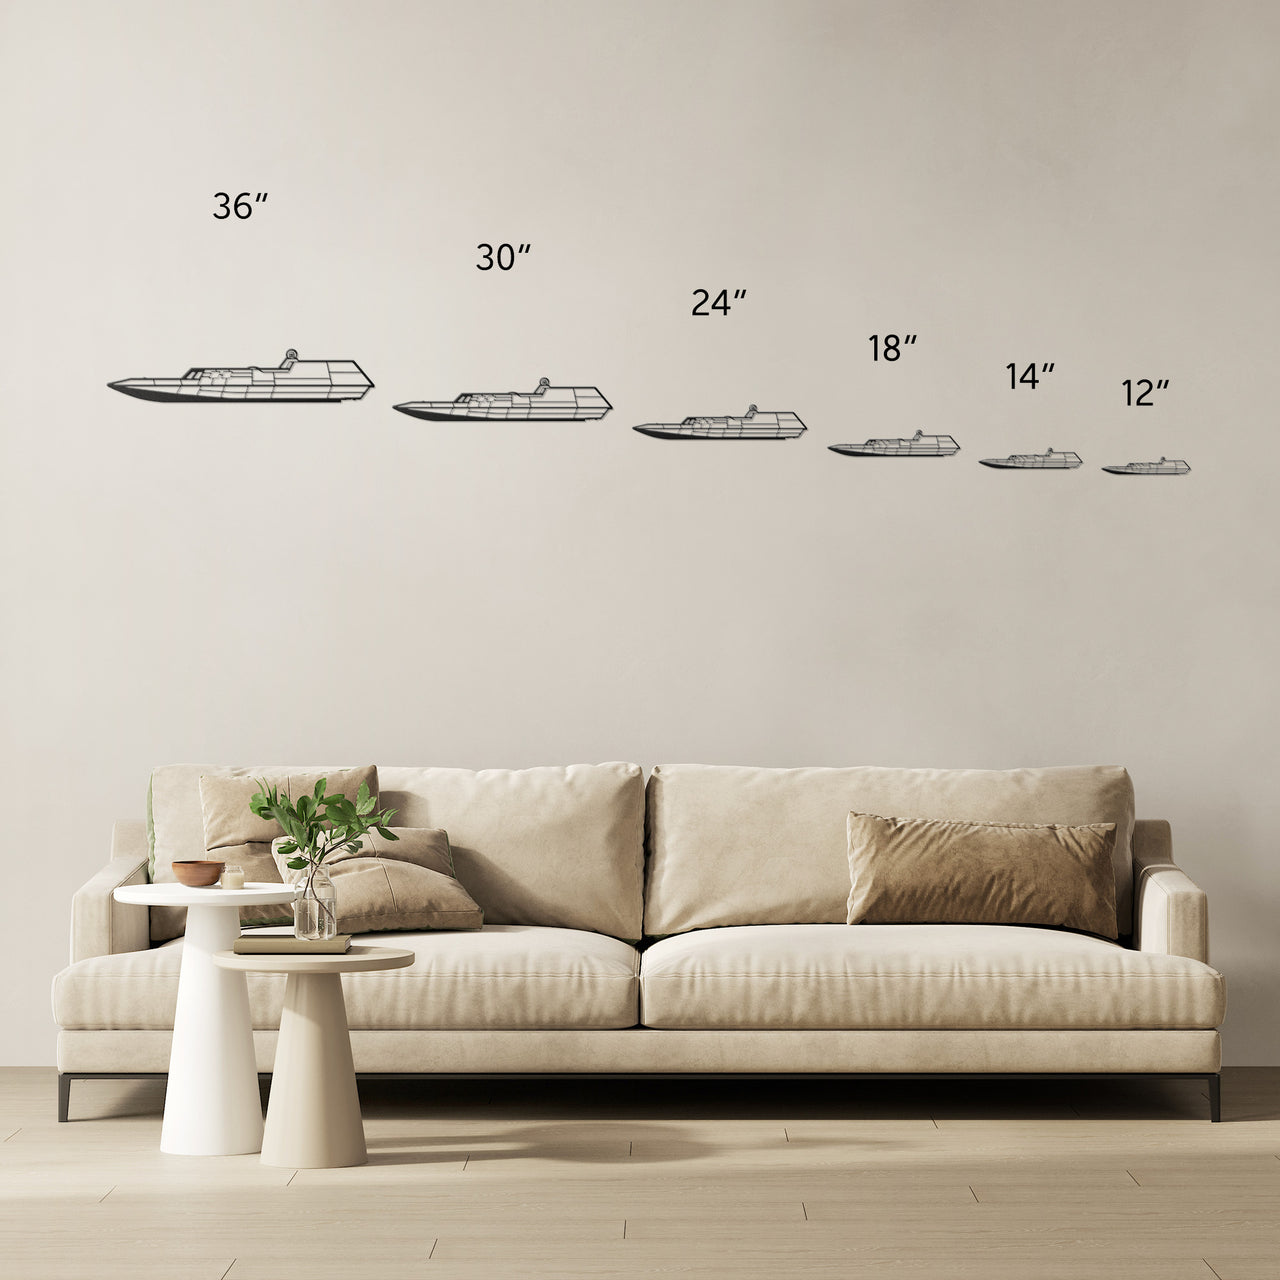 CCH - Combatant Craft Heavy: Die Cut Wall Art